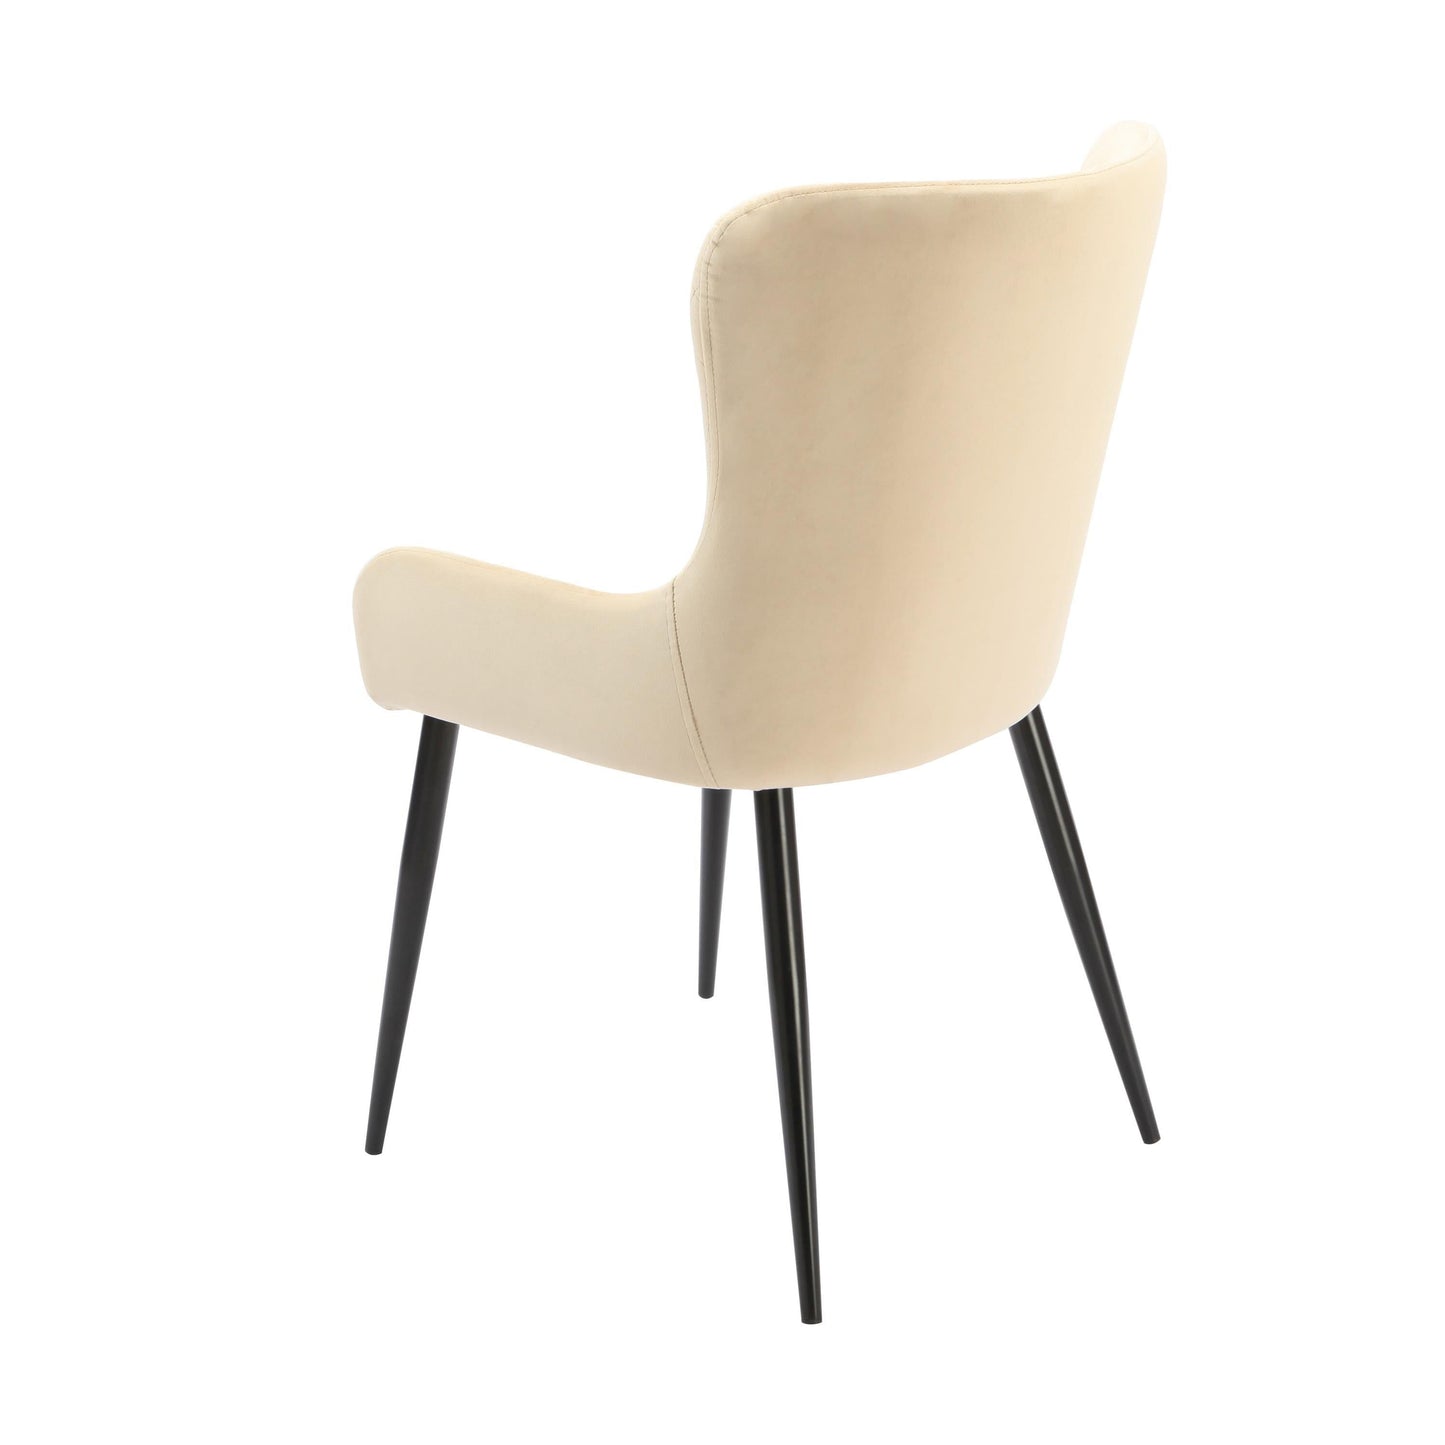 2 Set diamond beige dining chair by Native